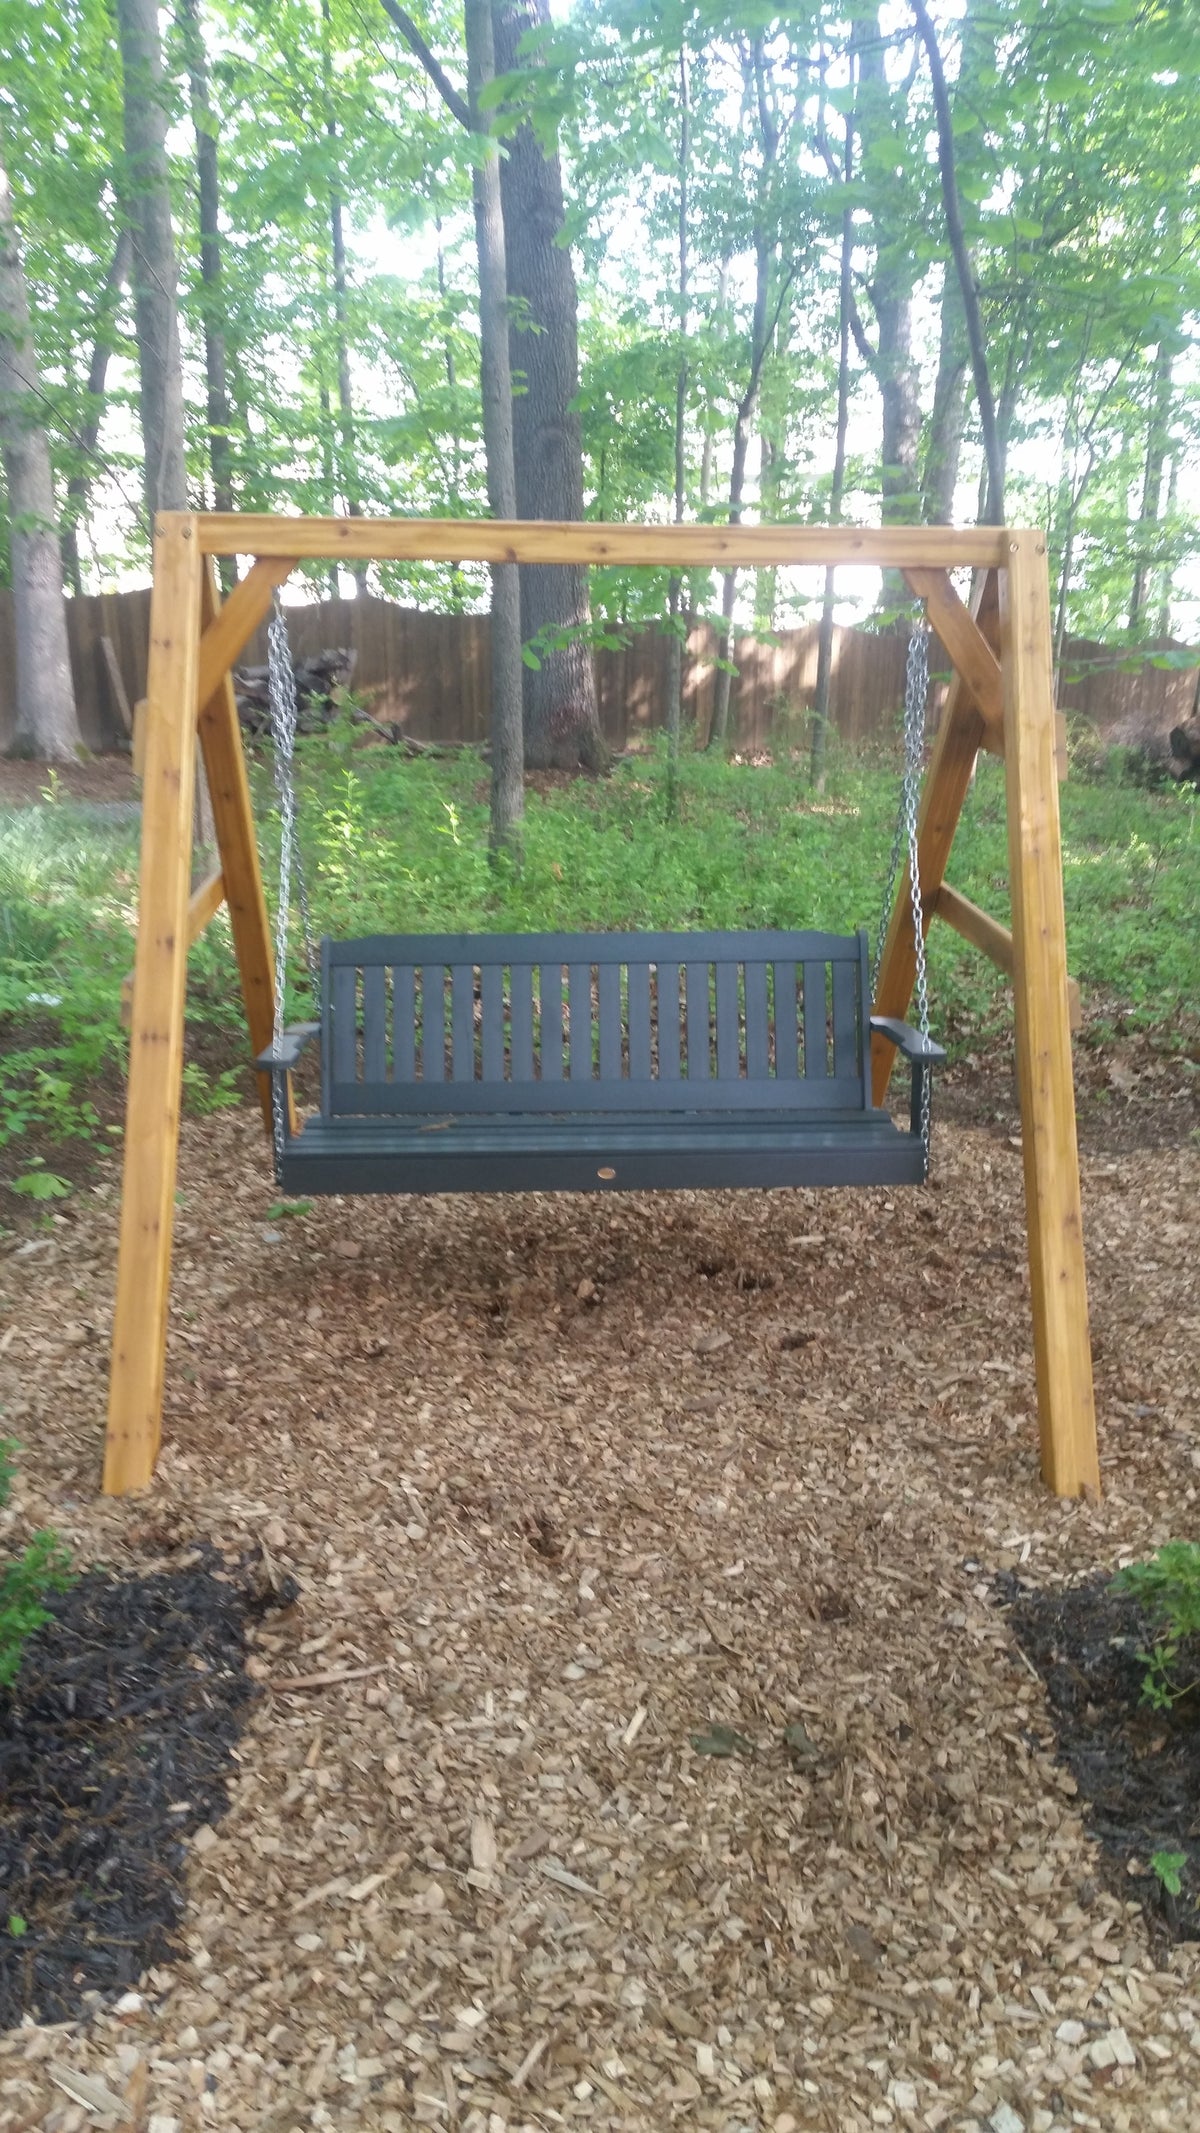 Western Red Cedar 4x4 A-Frame Swing Stand for Swing or Swingbed (Hangers Included)